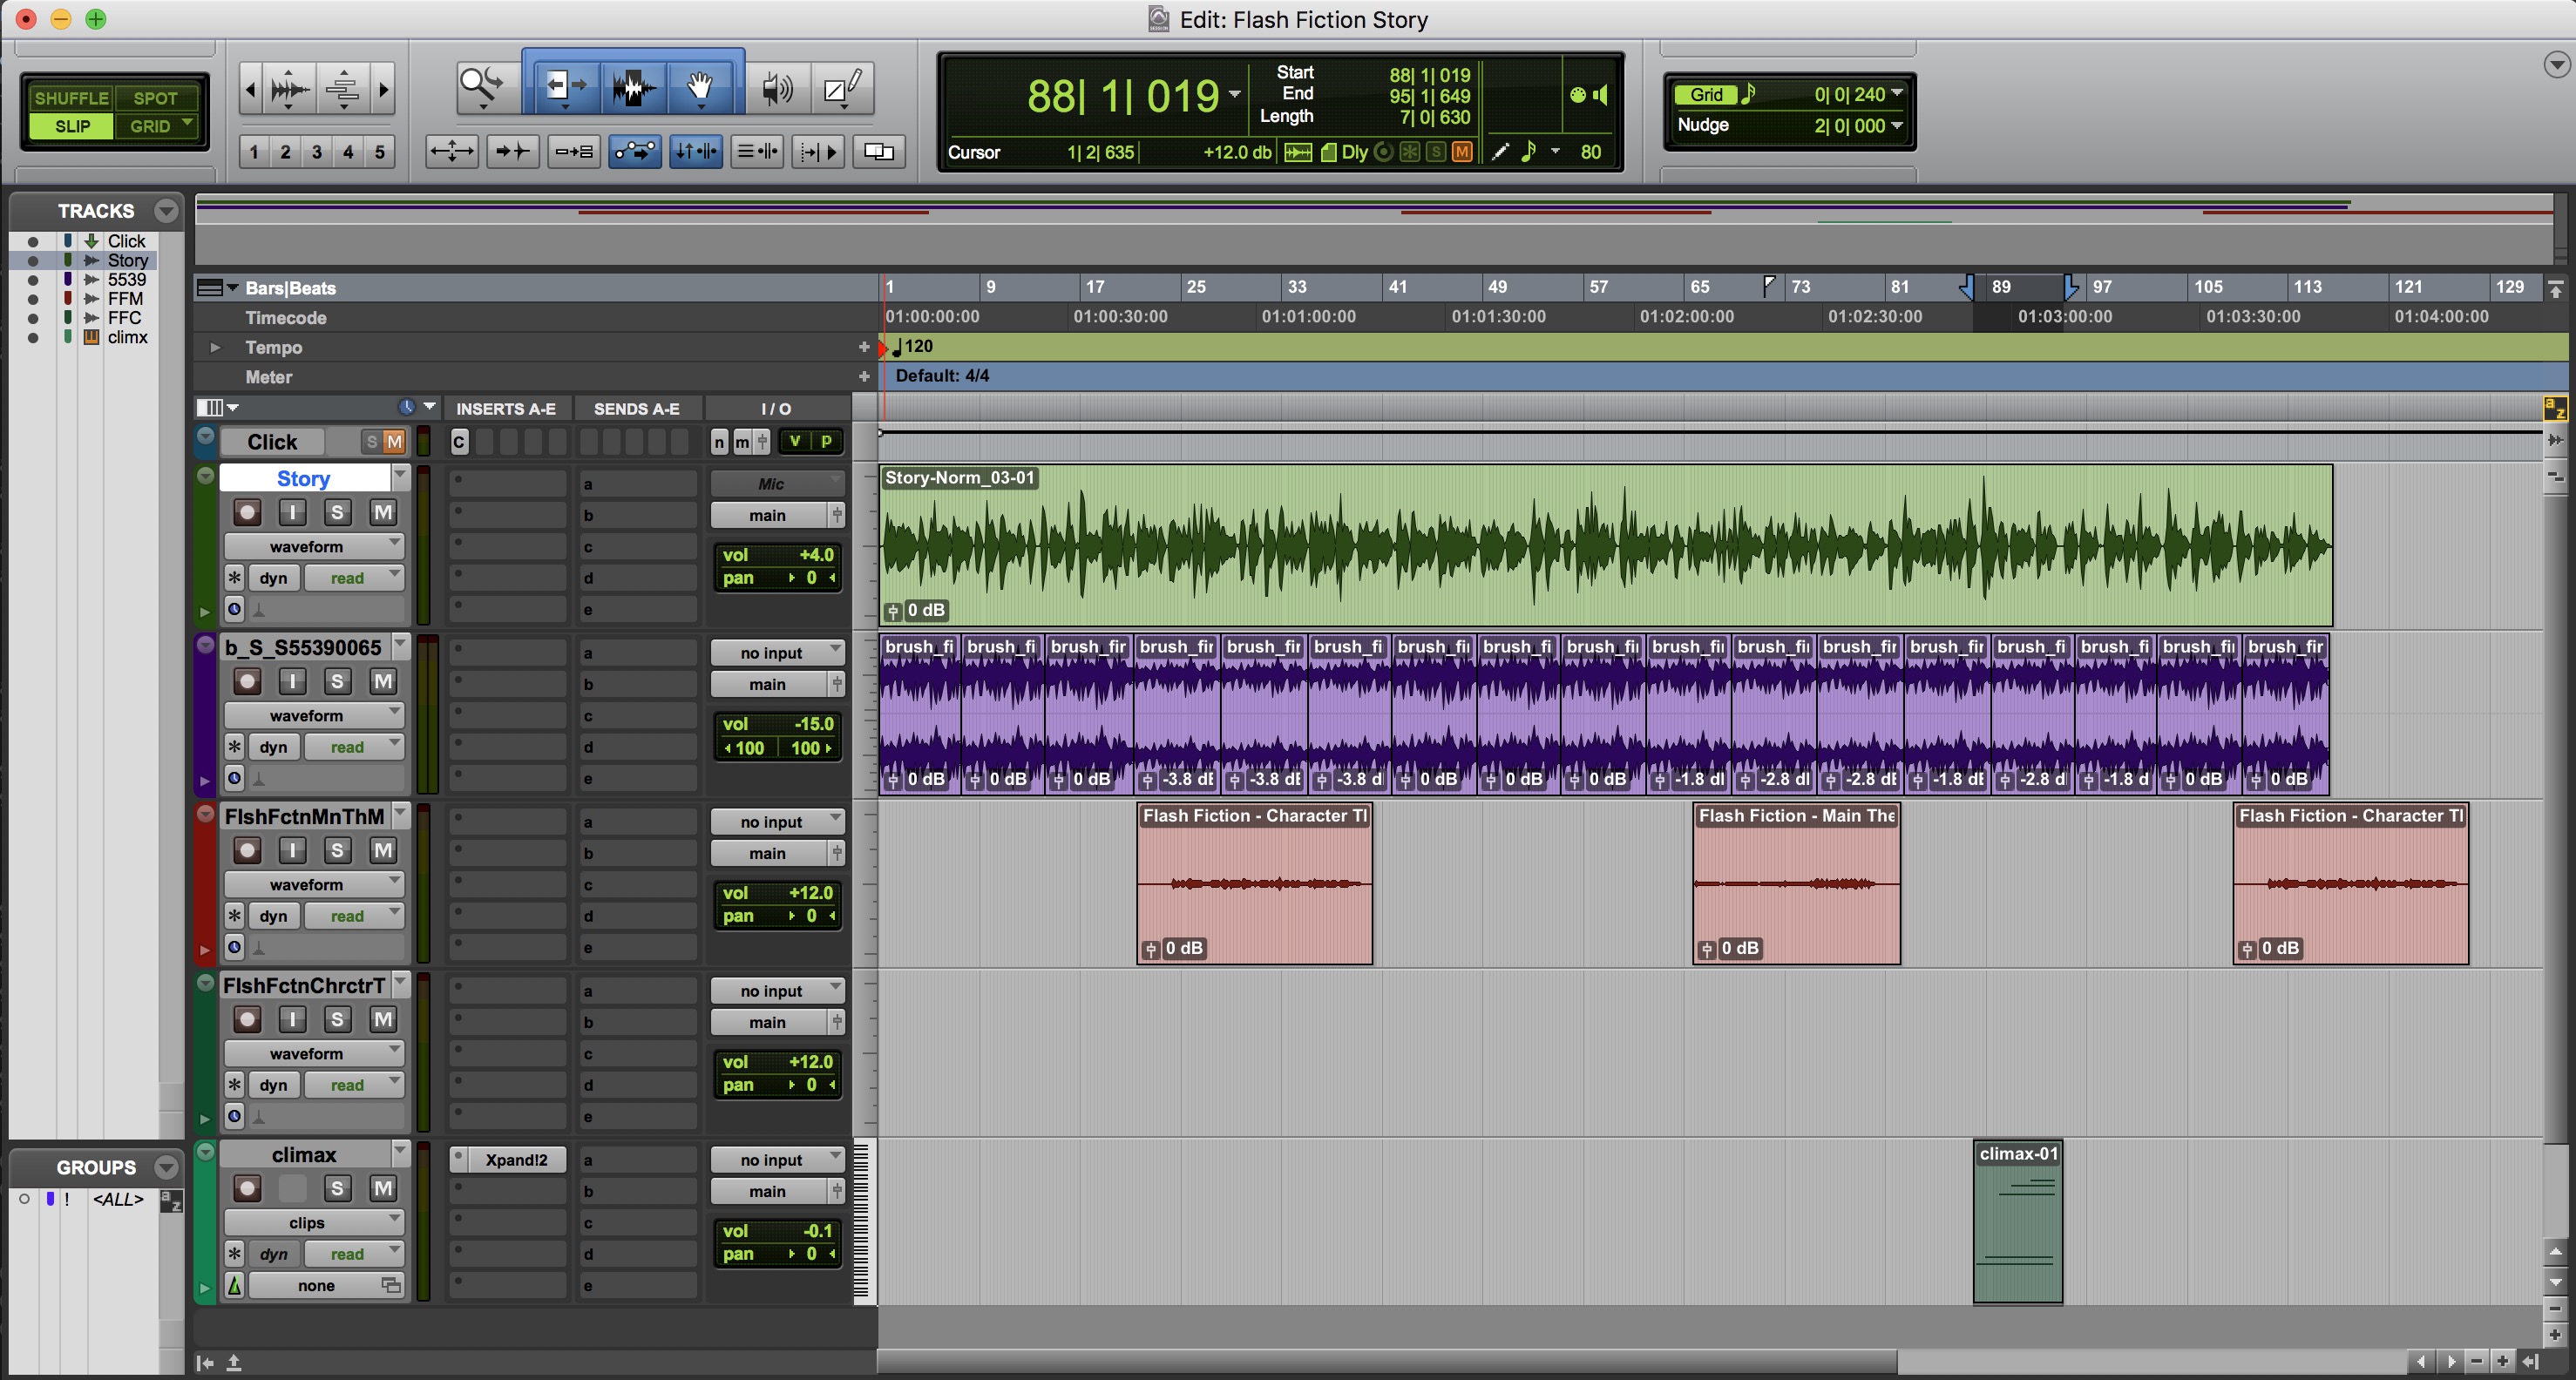 This is a screenshot showing how I produced the entire audio book in Pro Tools